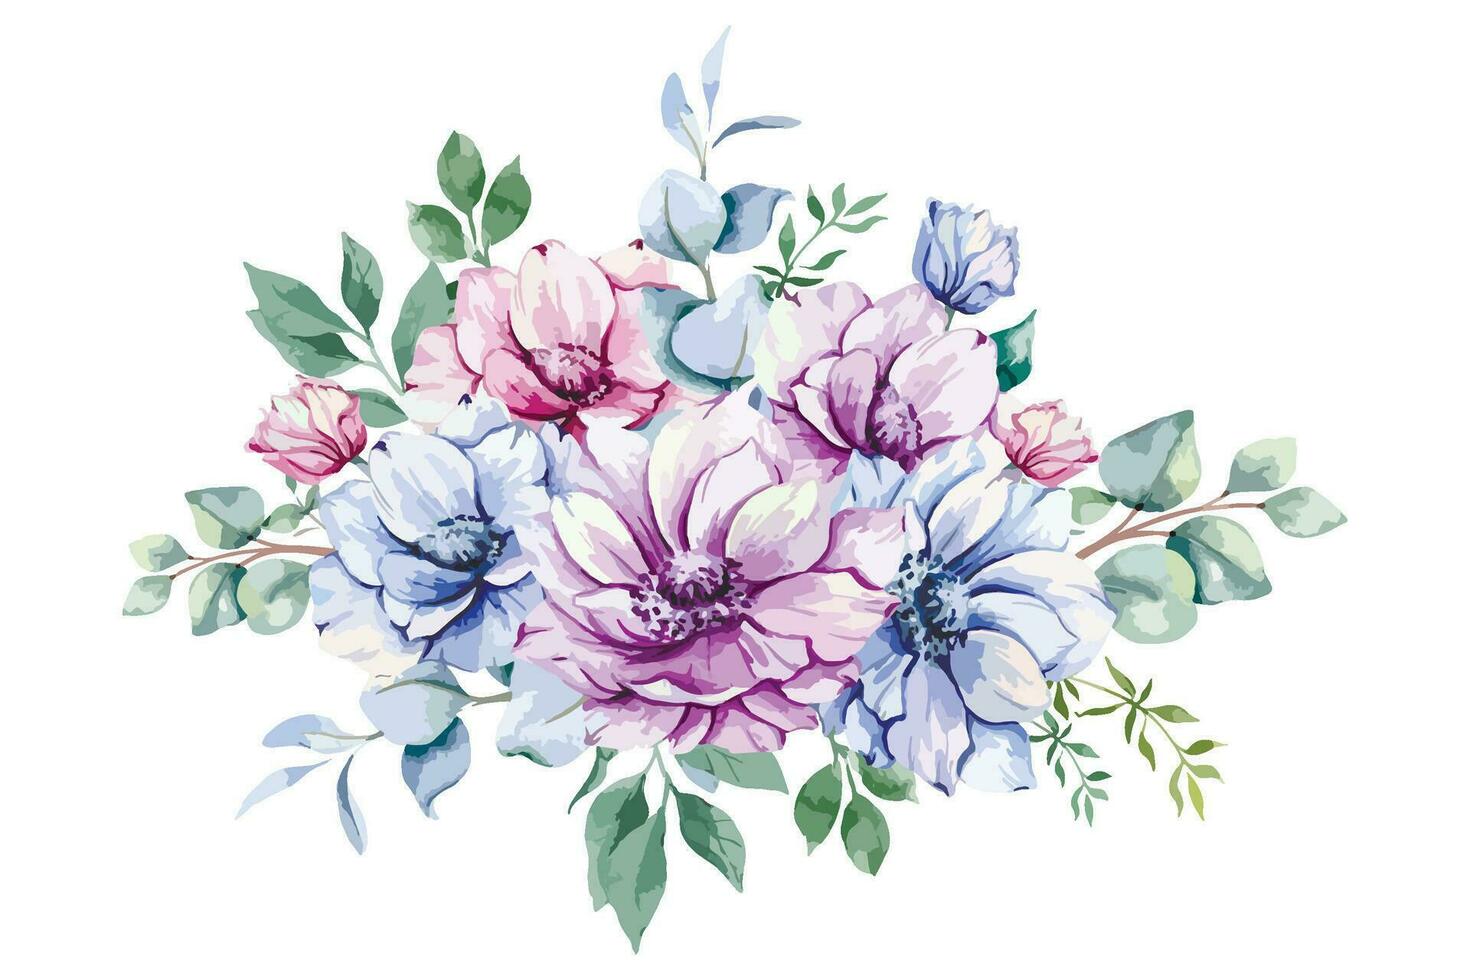 Anemone Flowers Watercolor Illustration. Blue, Pink and Purple Anemones Hand Painted isolated on white background.  Perfect for wedding invitations, bridal shower and  floral greeting cards vector